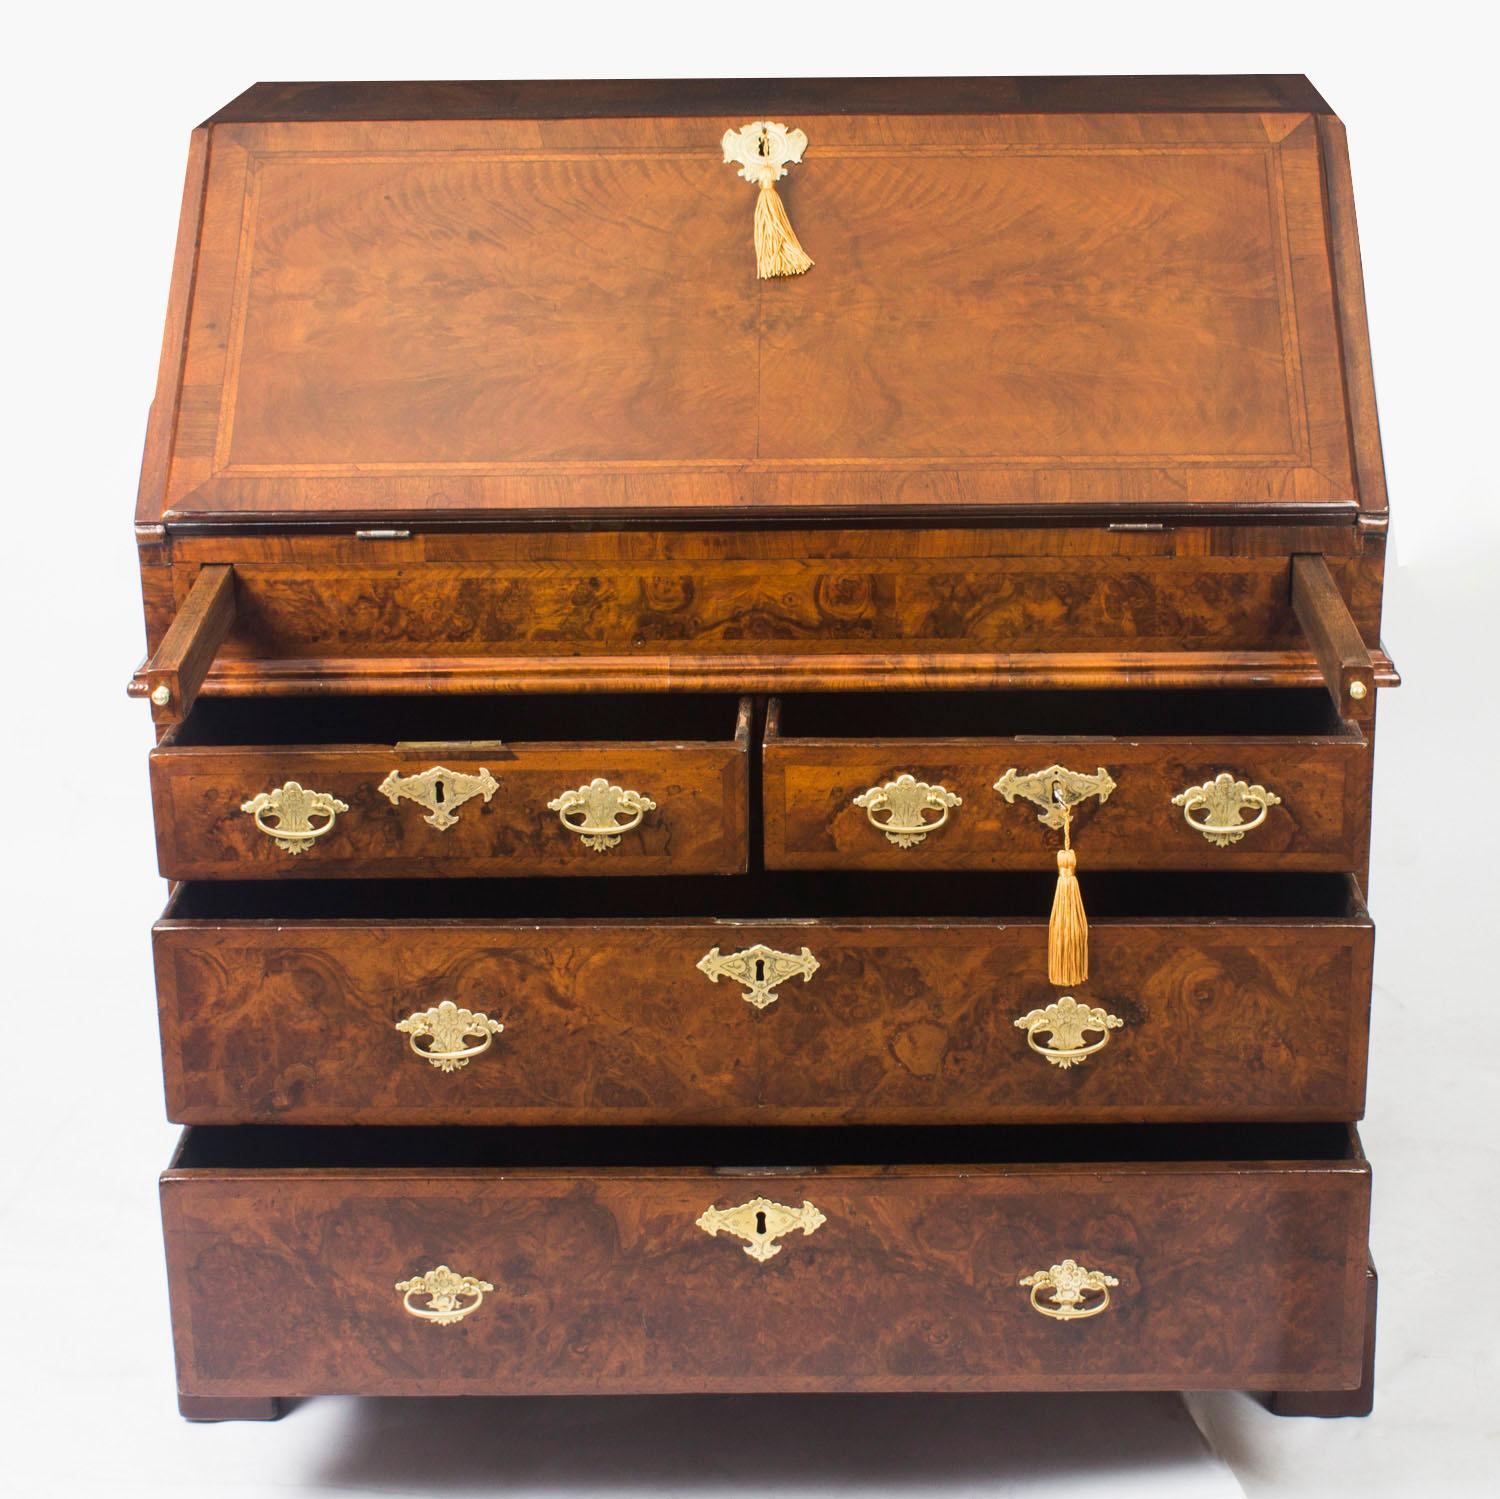 A stunning 17th century William & Mary burr walnut and feather banded bureau, circa 1690 in date.

The hinged fall enclosing a fitted stepped interior with four small drawers and a central cupboard, secret compartments and a well with a sliding